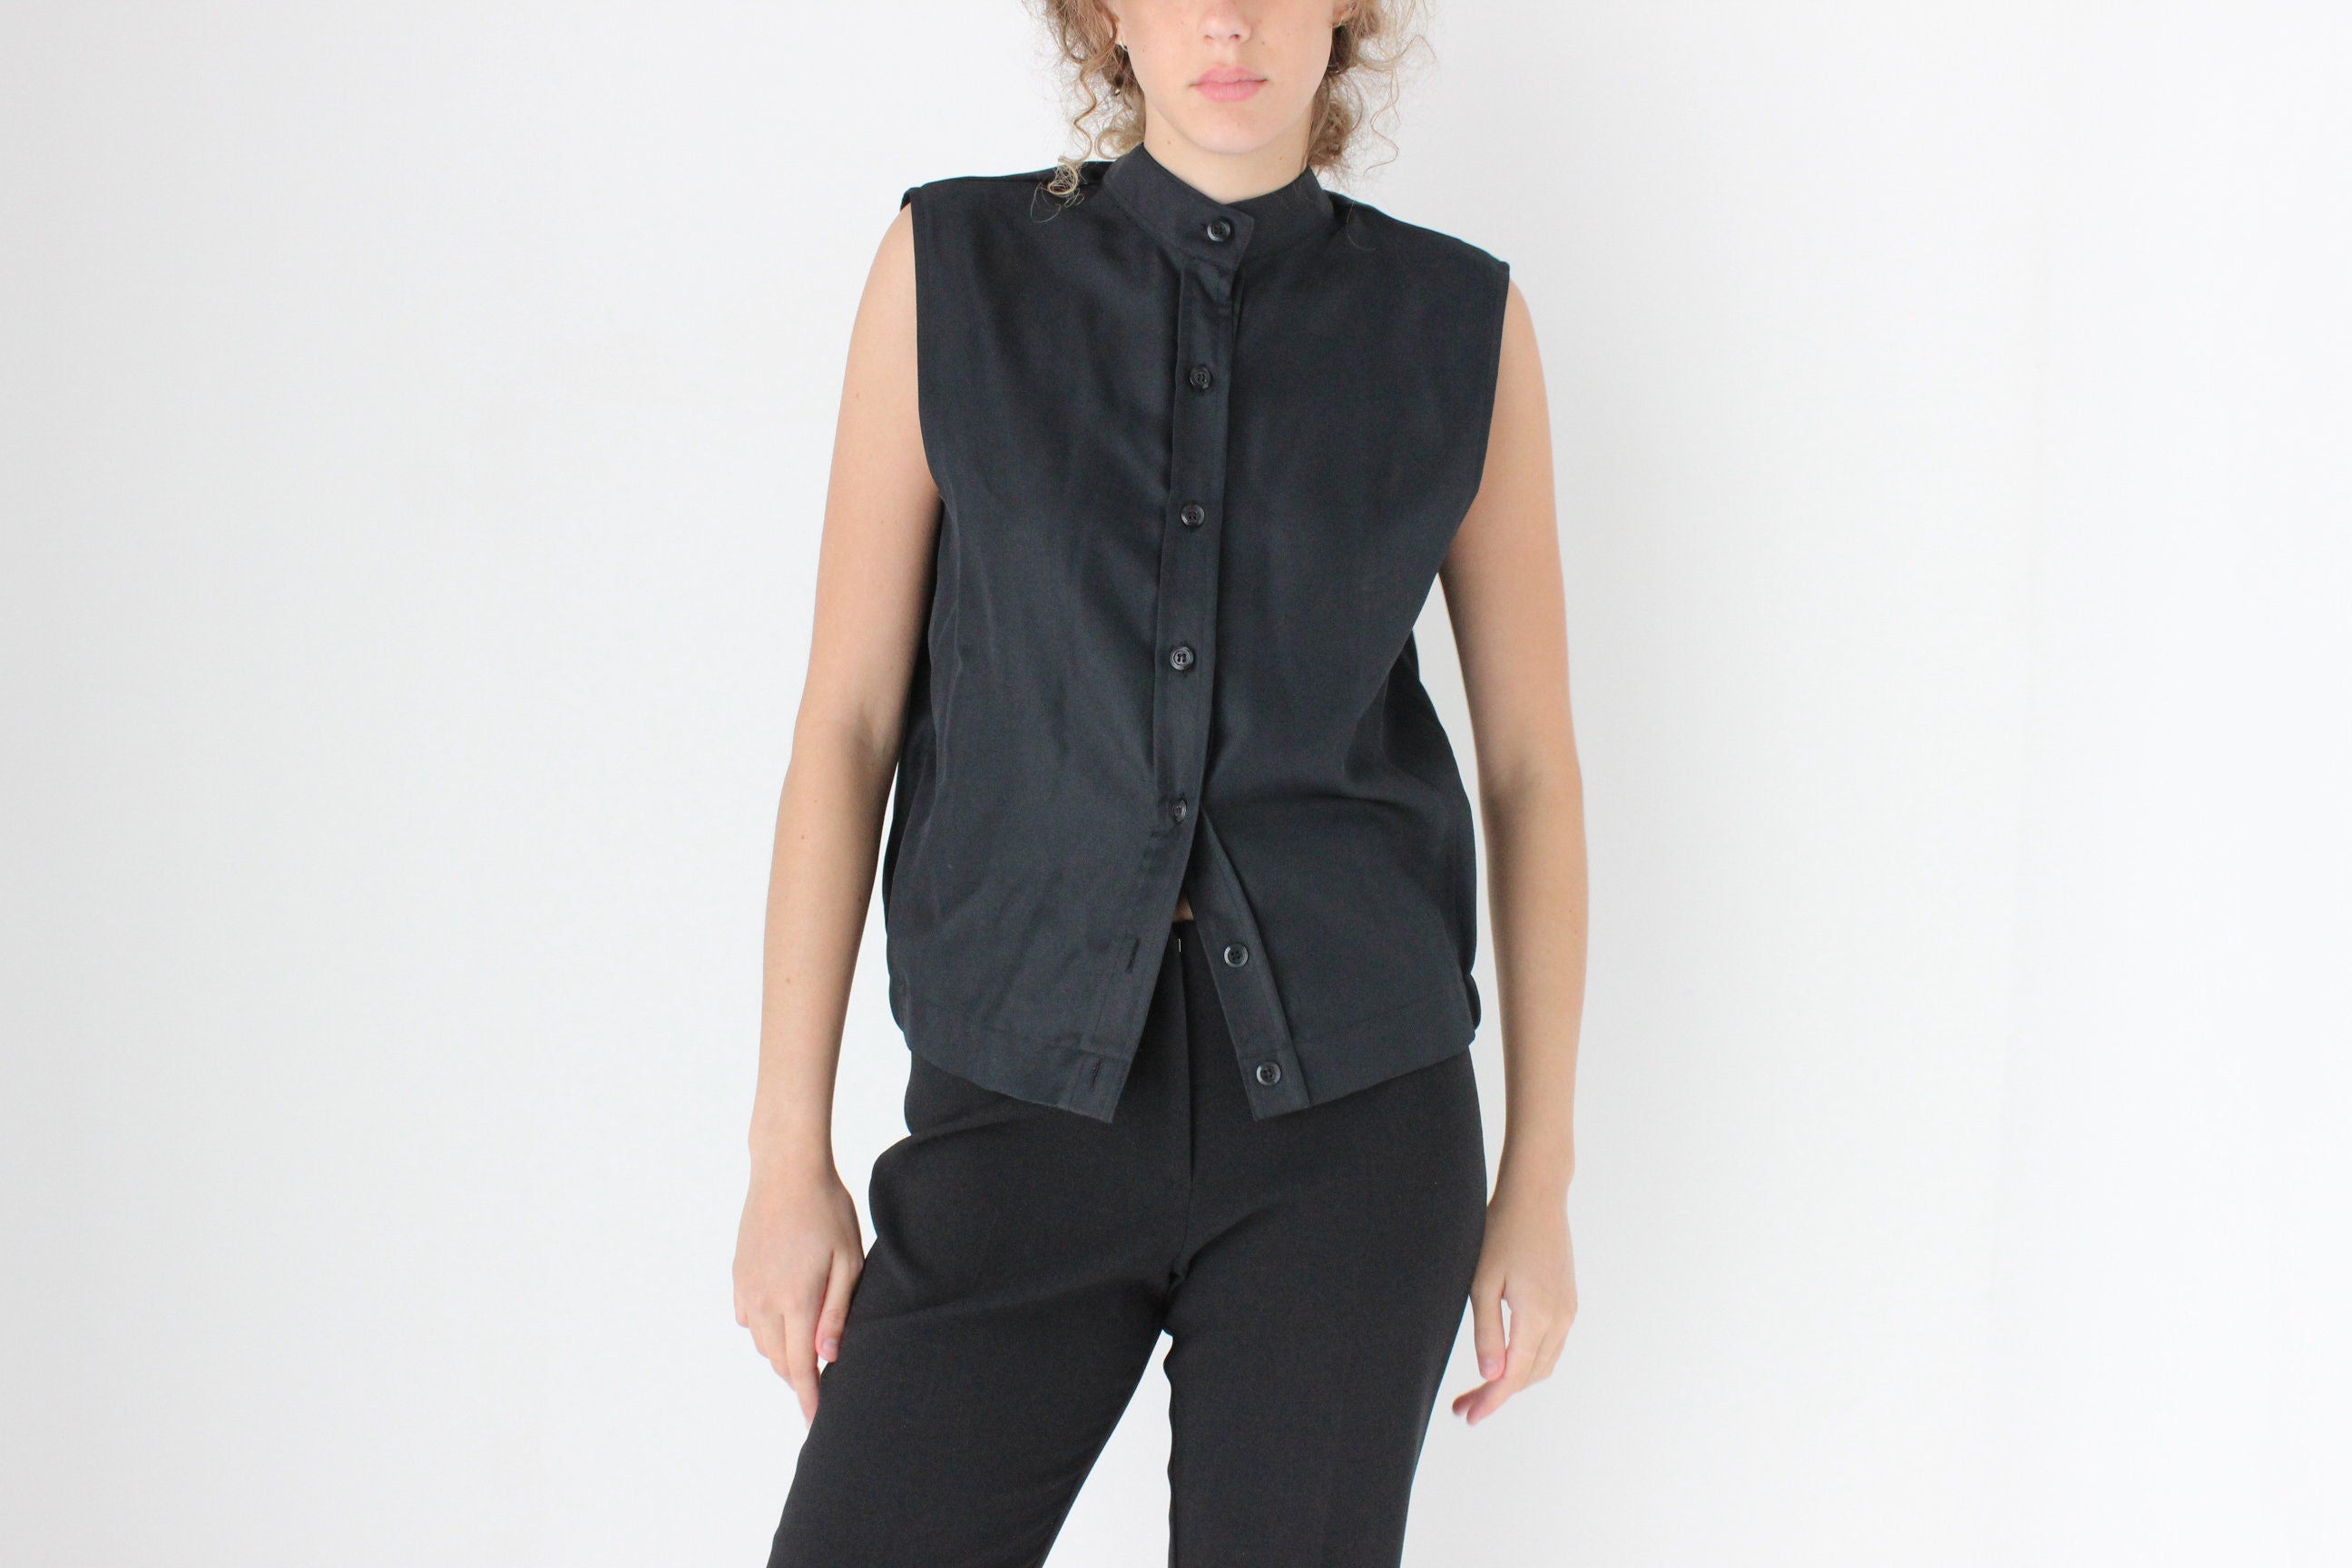 90s Unusual Business/Casual Button Front Waistcoat Top